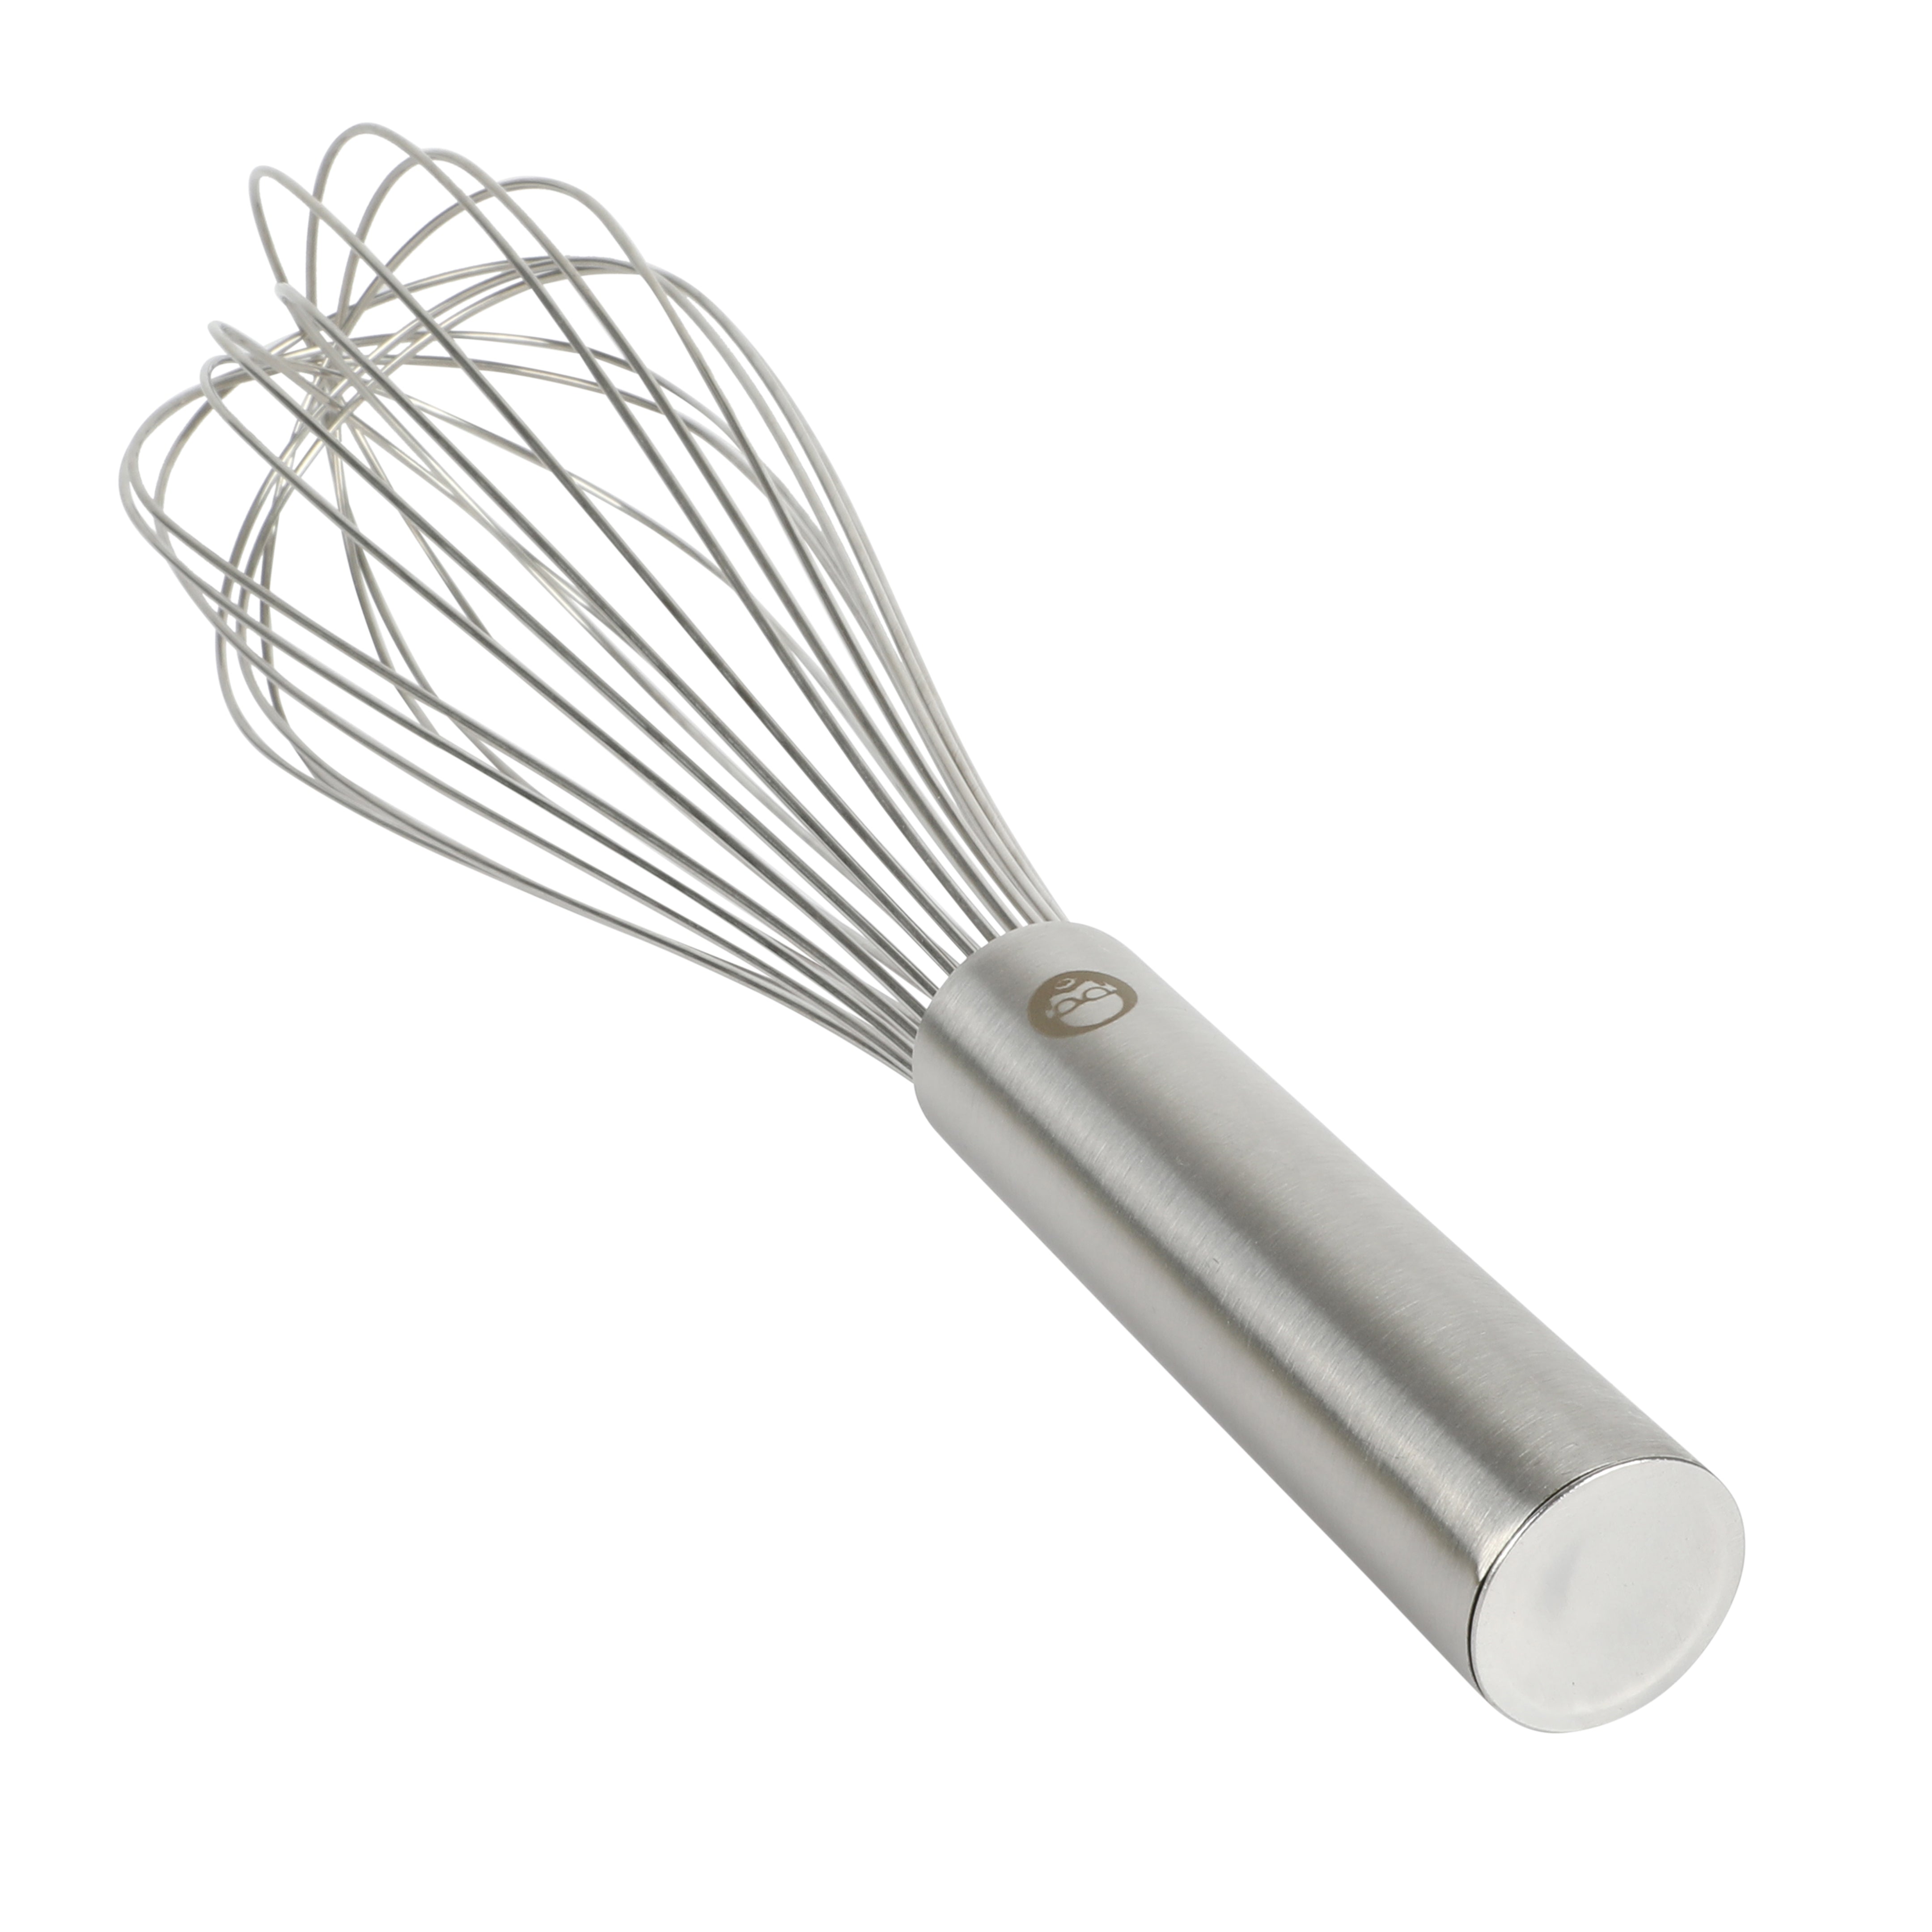 Babish 12 Inch Stainless Steel Whisk